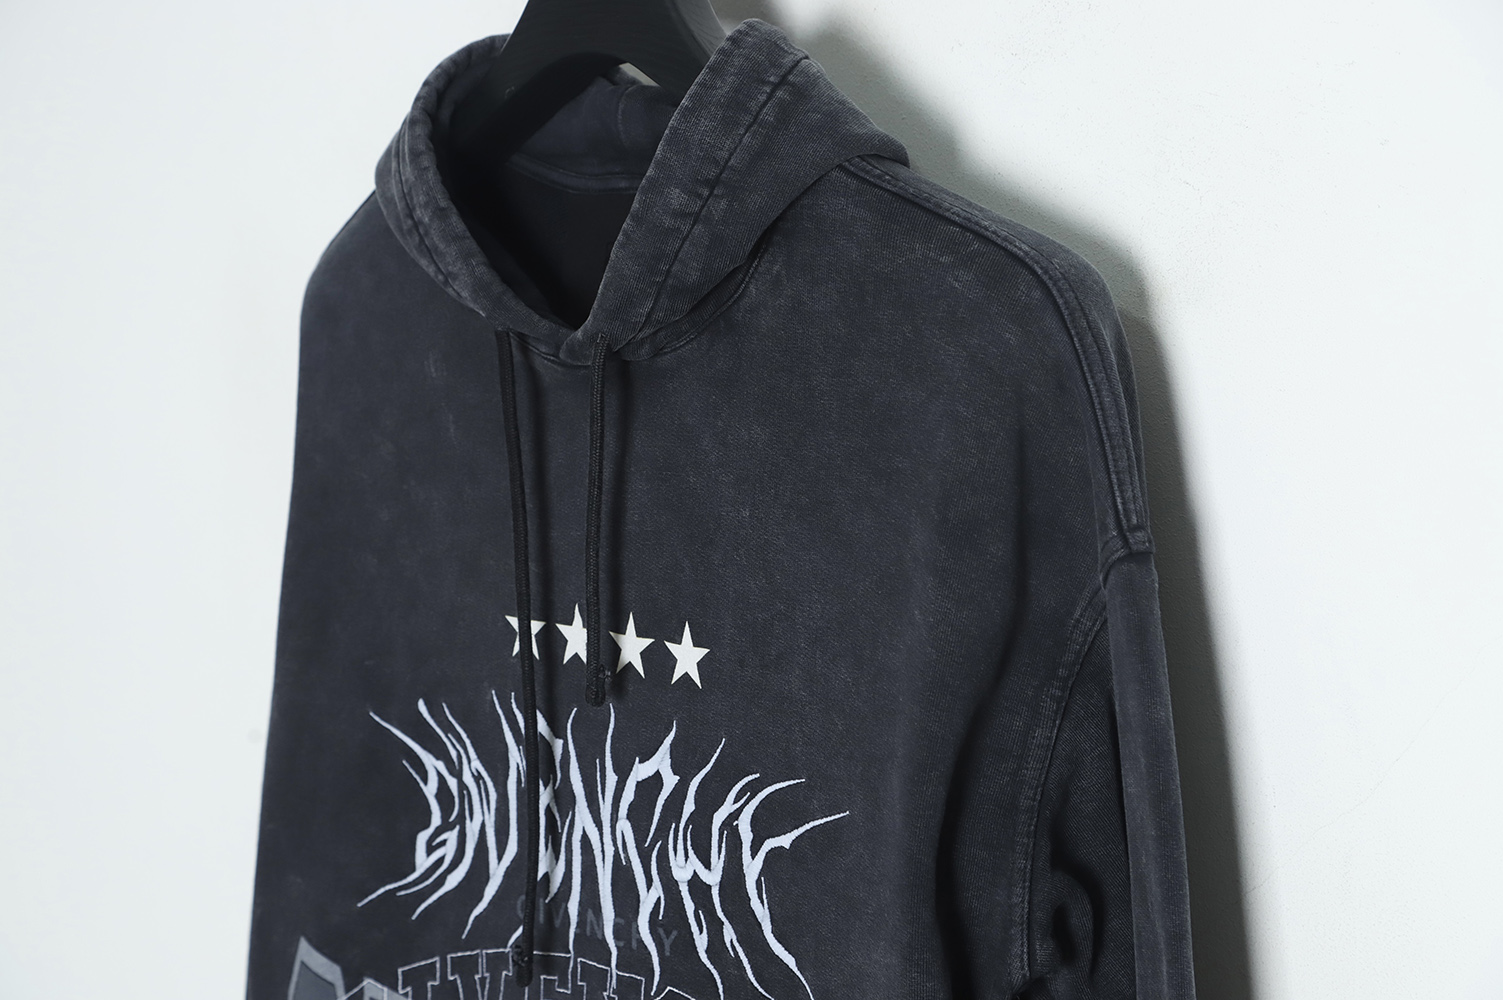 Givenchy 22FW Washed Embroidered Print Hoodie